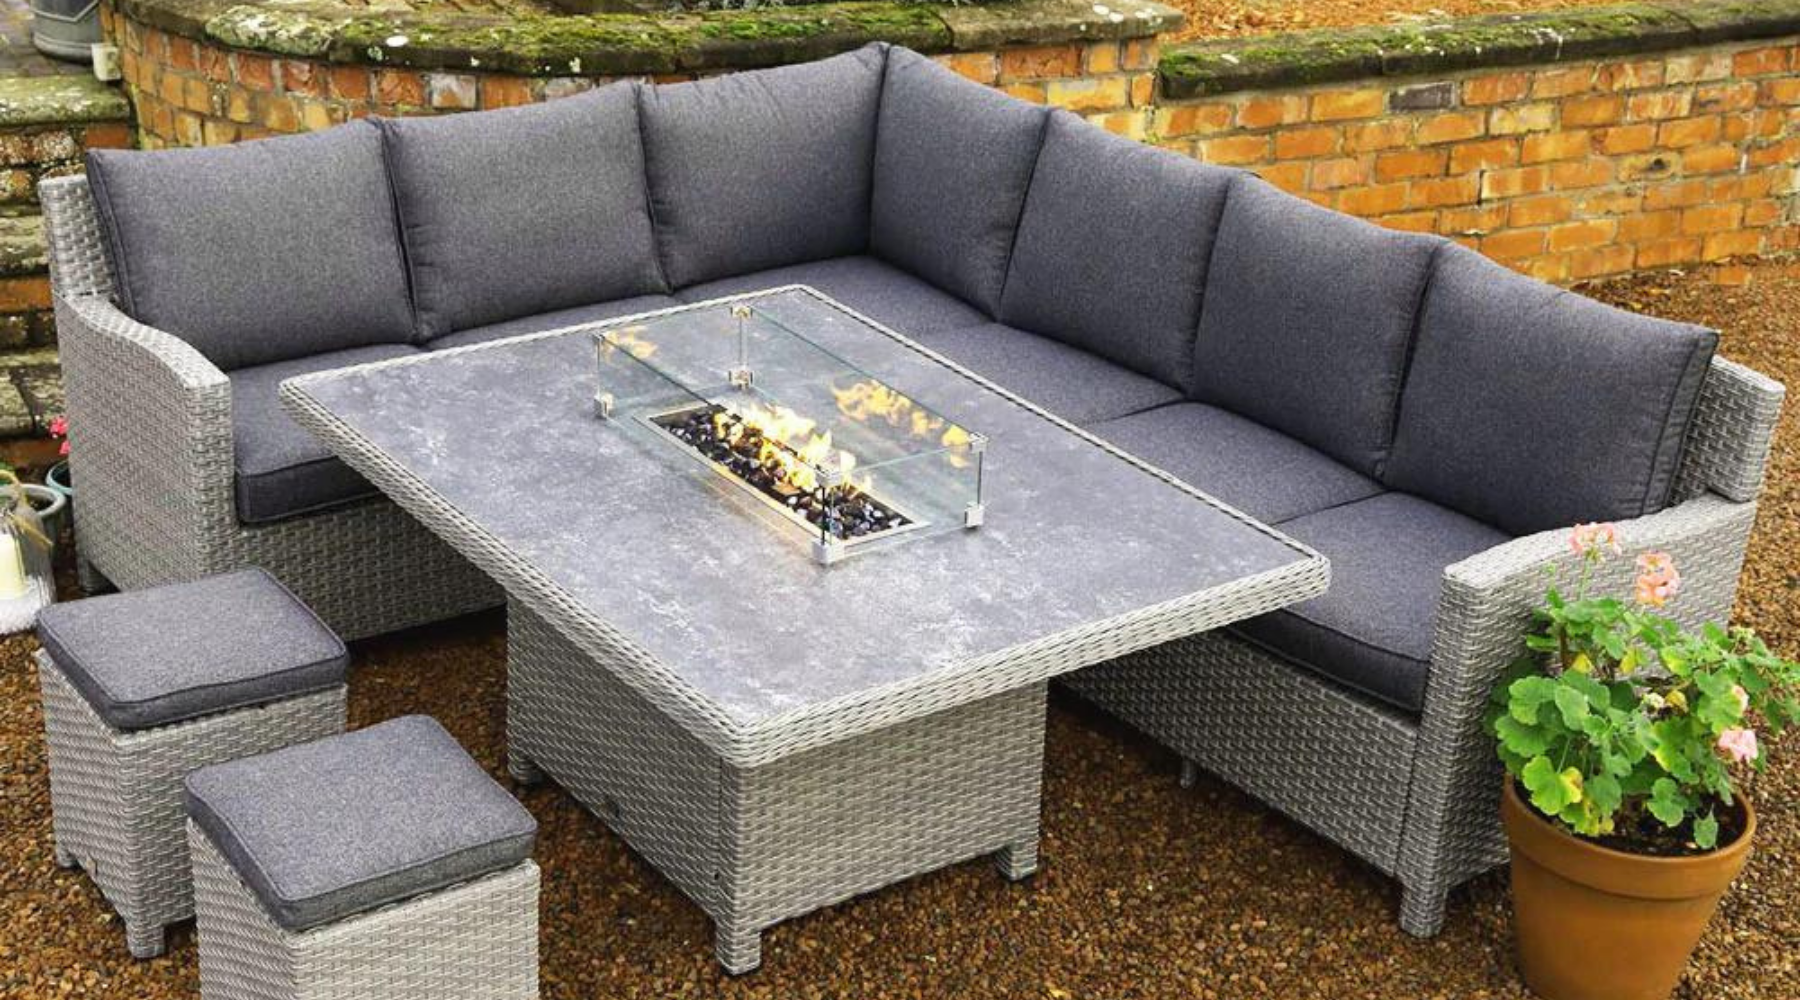 Corner Rattan Garden Furniture - Everything You Need to Know & Consider